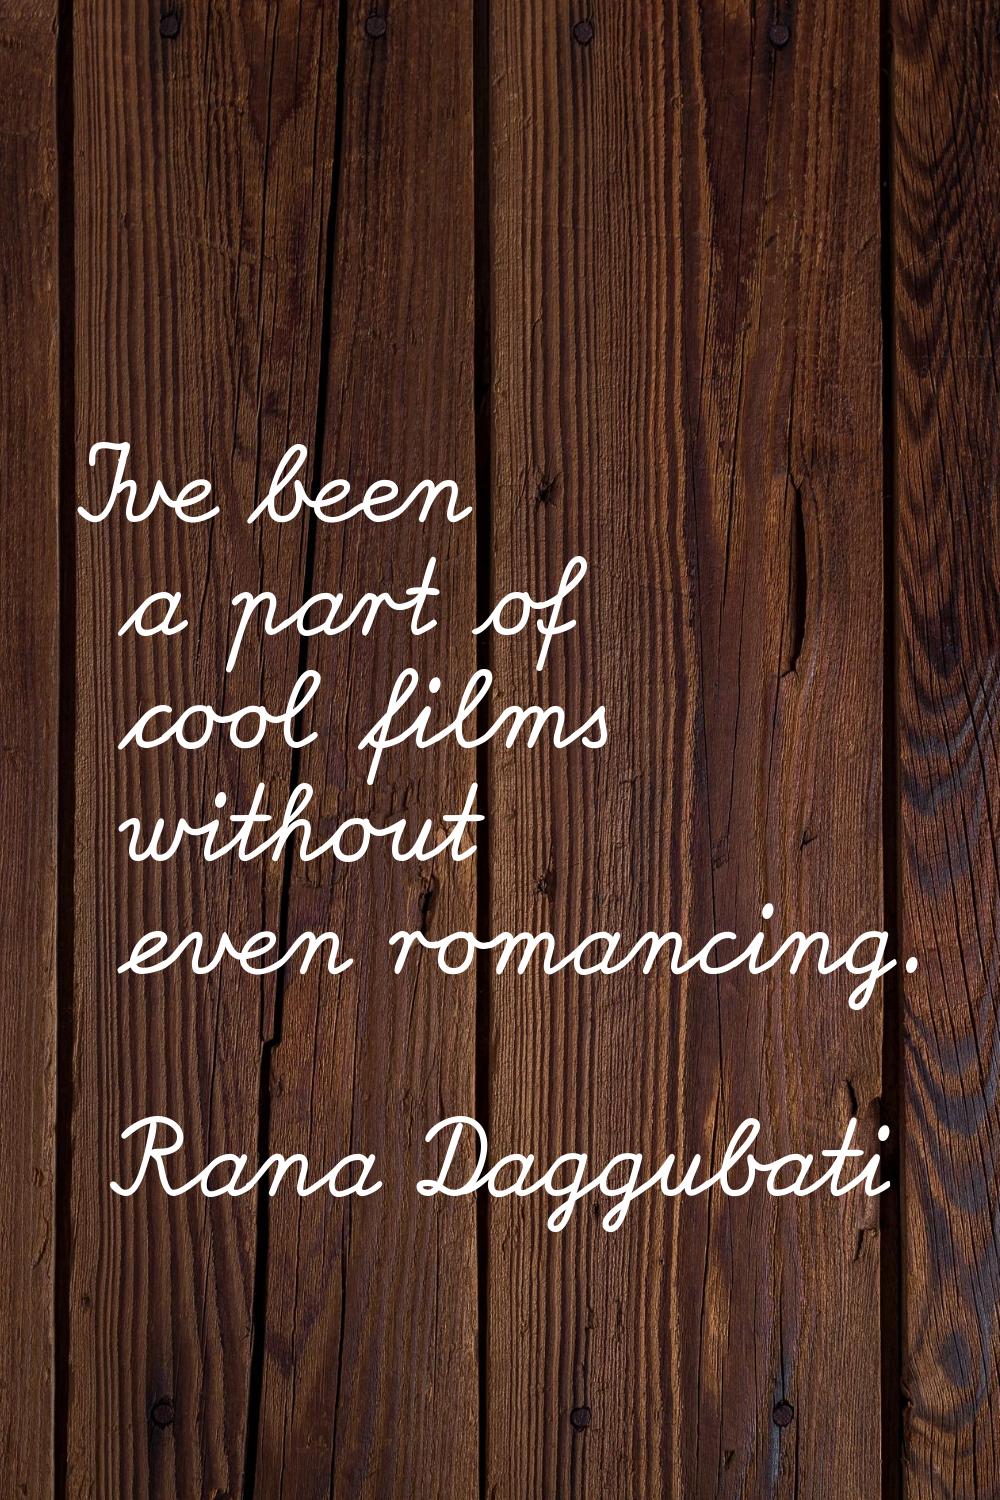 I've been a part of cool films without even romancing.